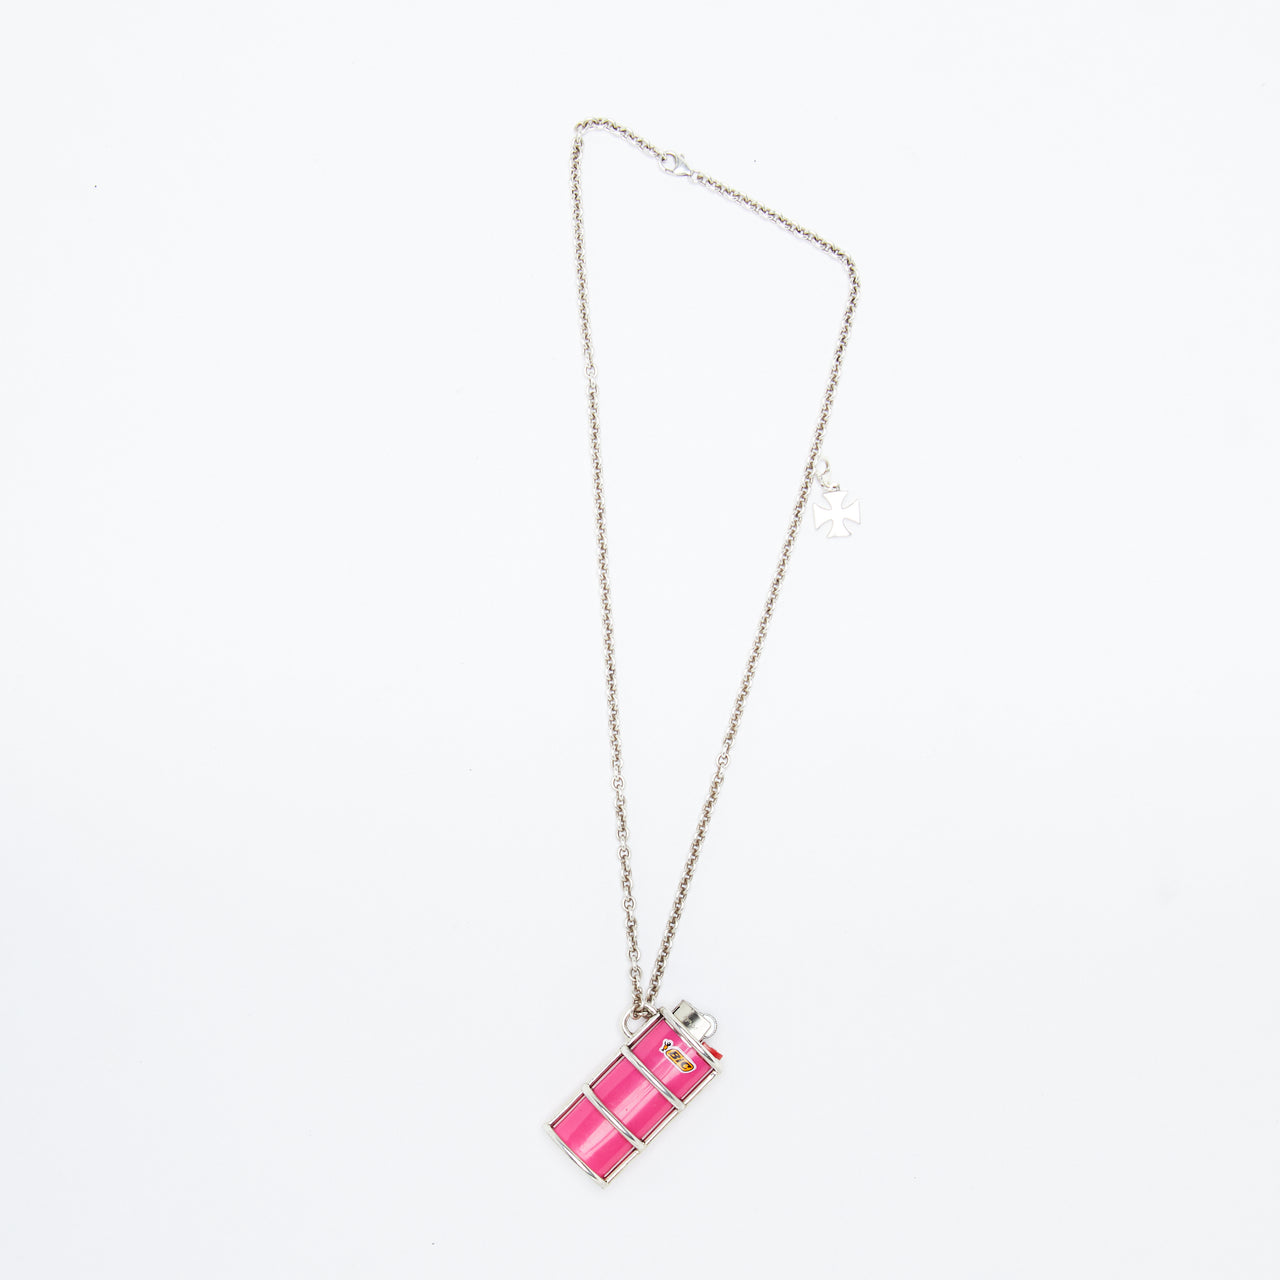 Portalighter Necklace (Silver/Pink)